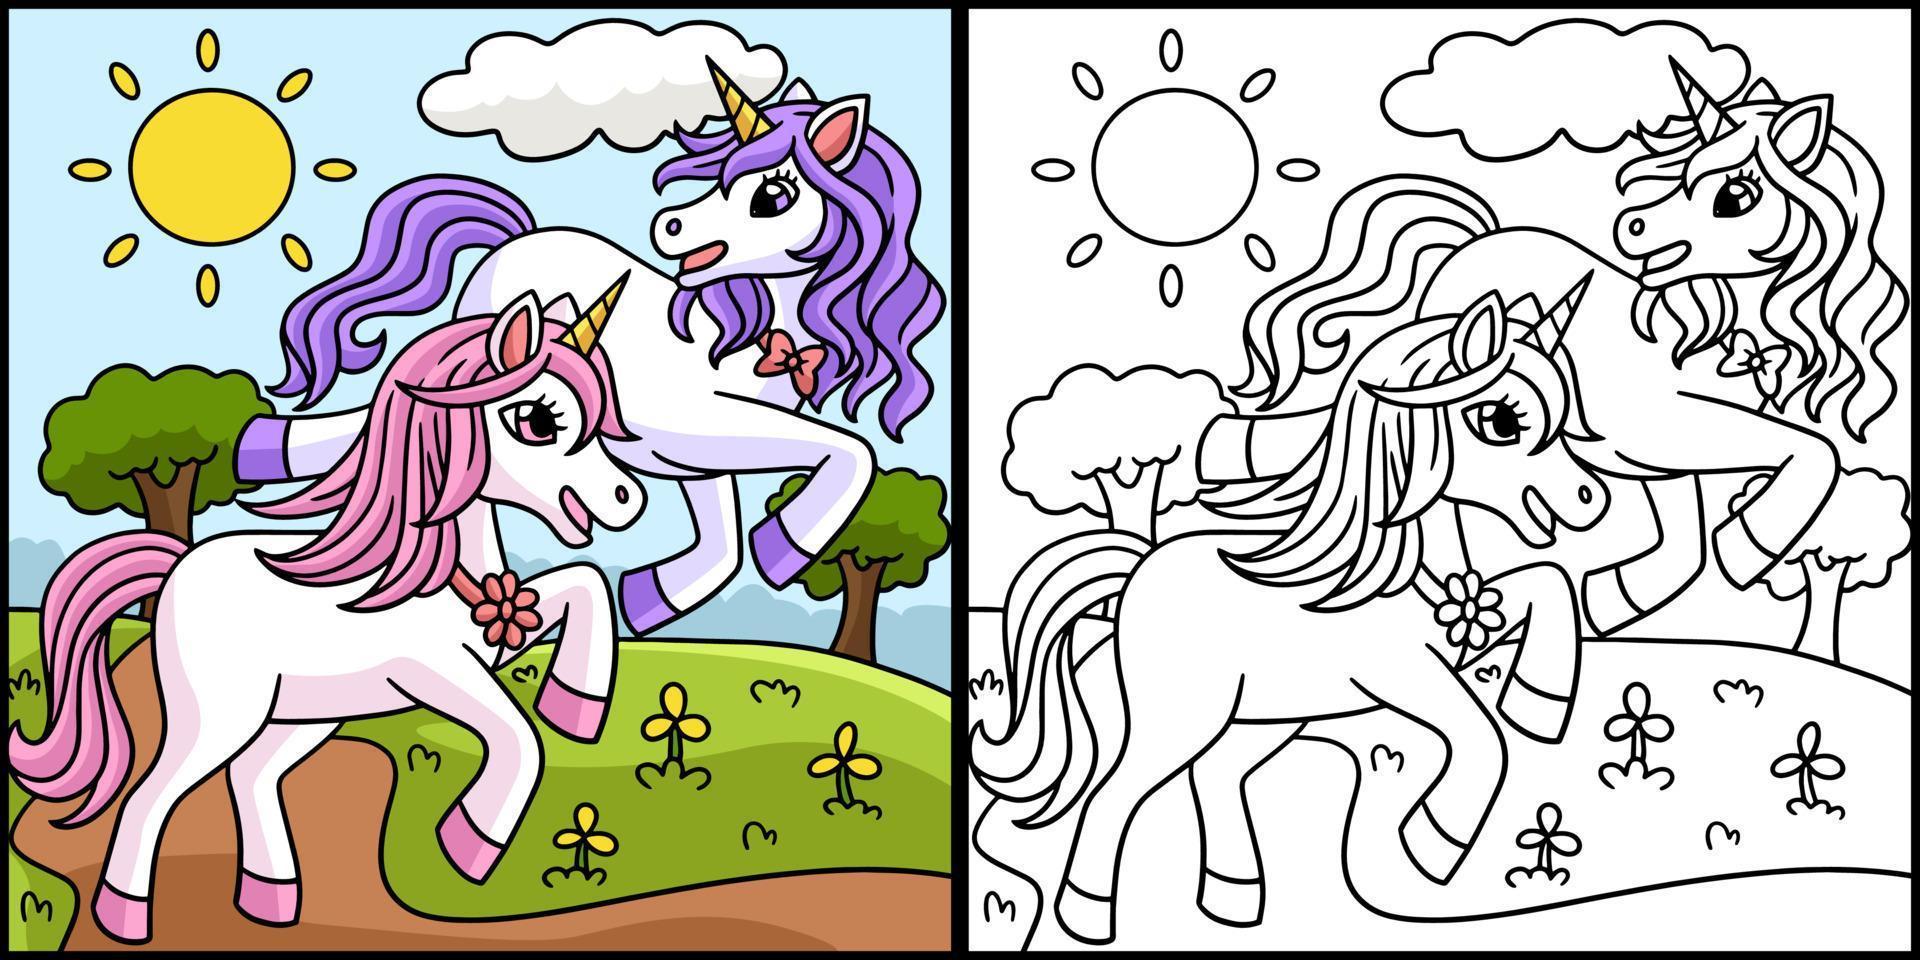 Unicorn With A Friend Coloring Page Illustration vector